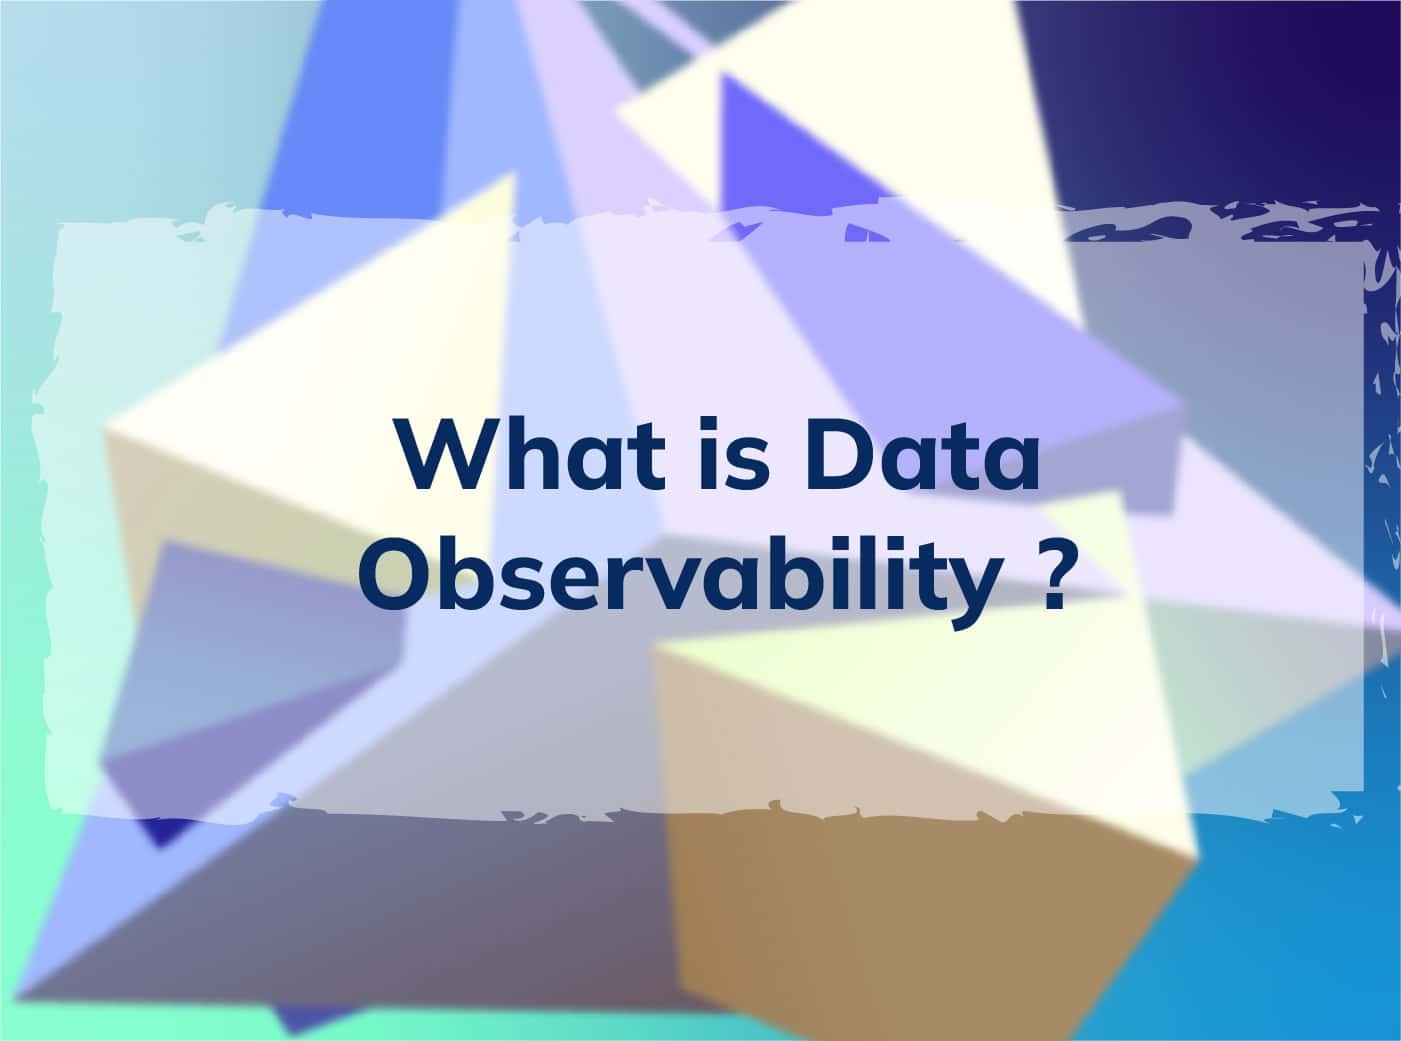 Data Observability Tools and Its Key Applications